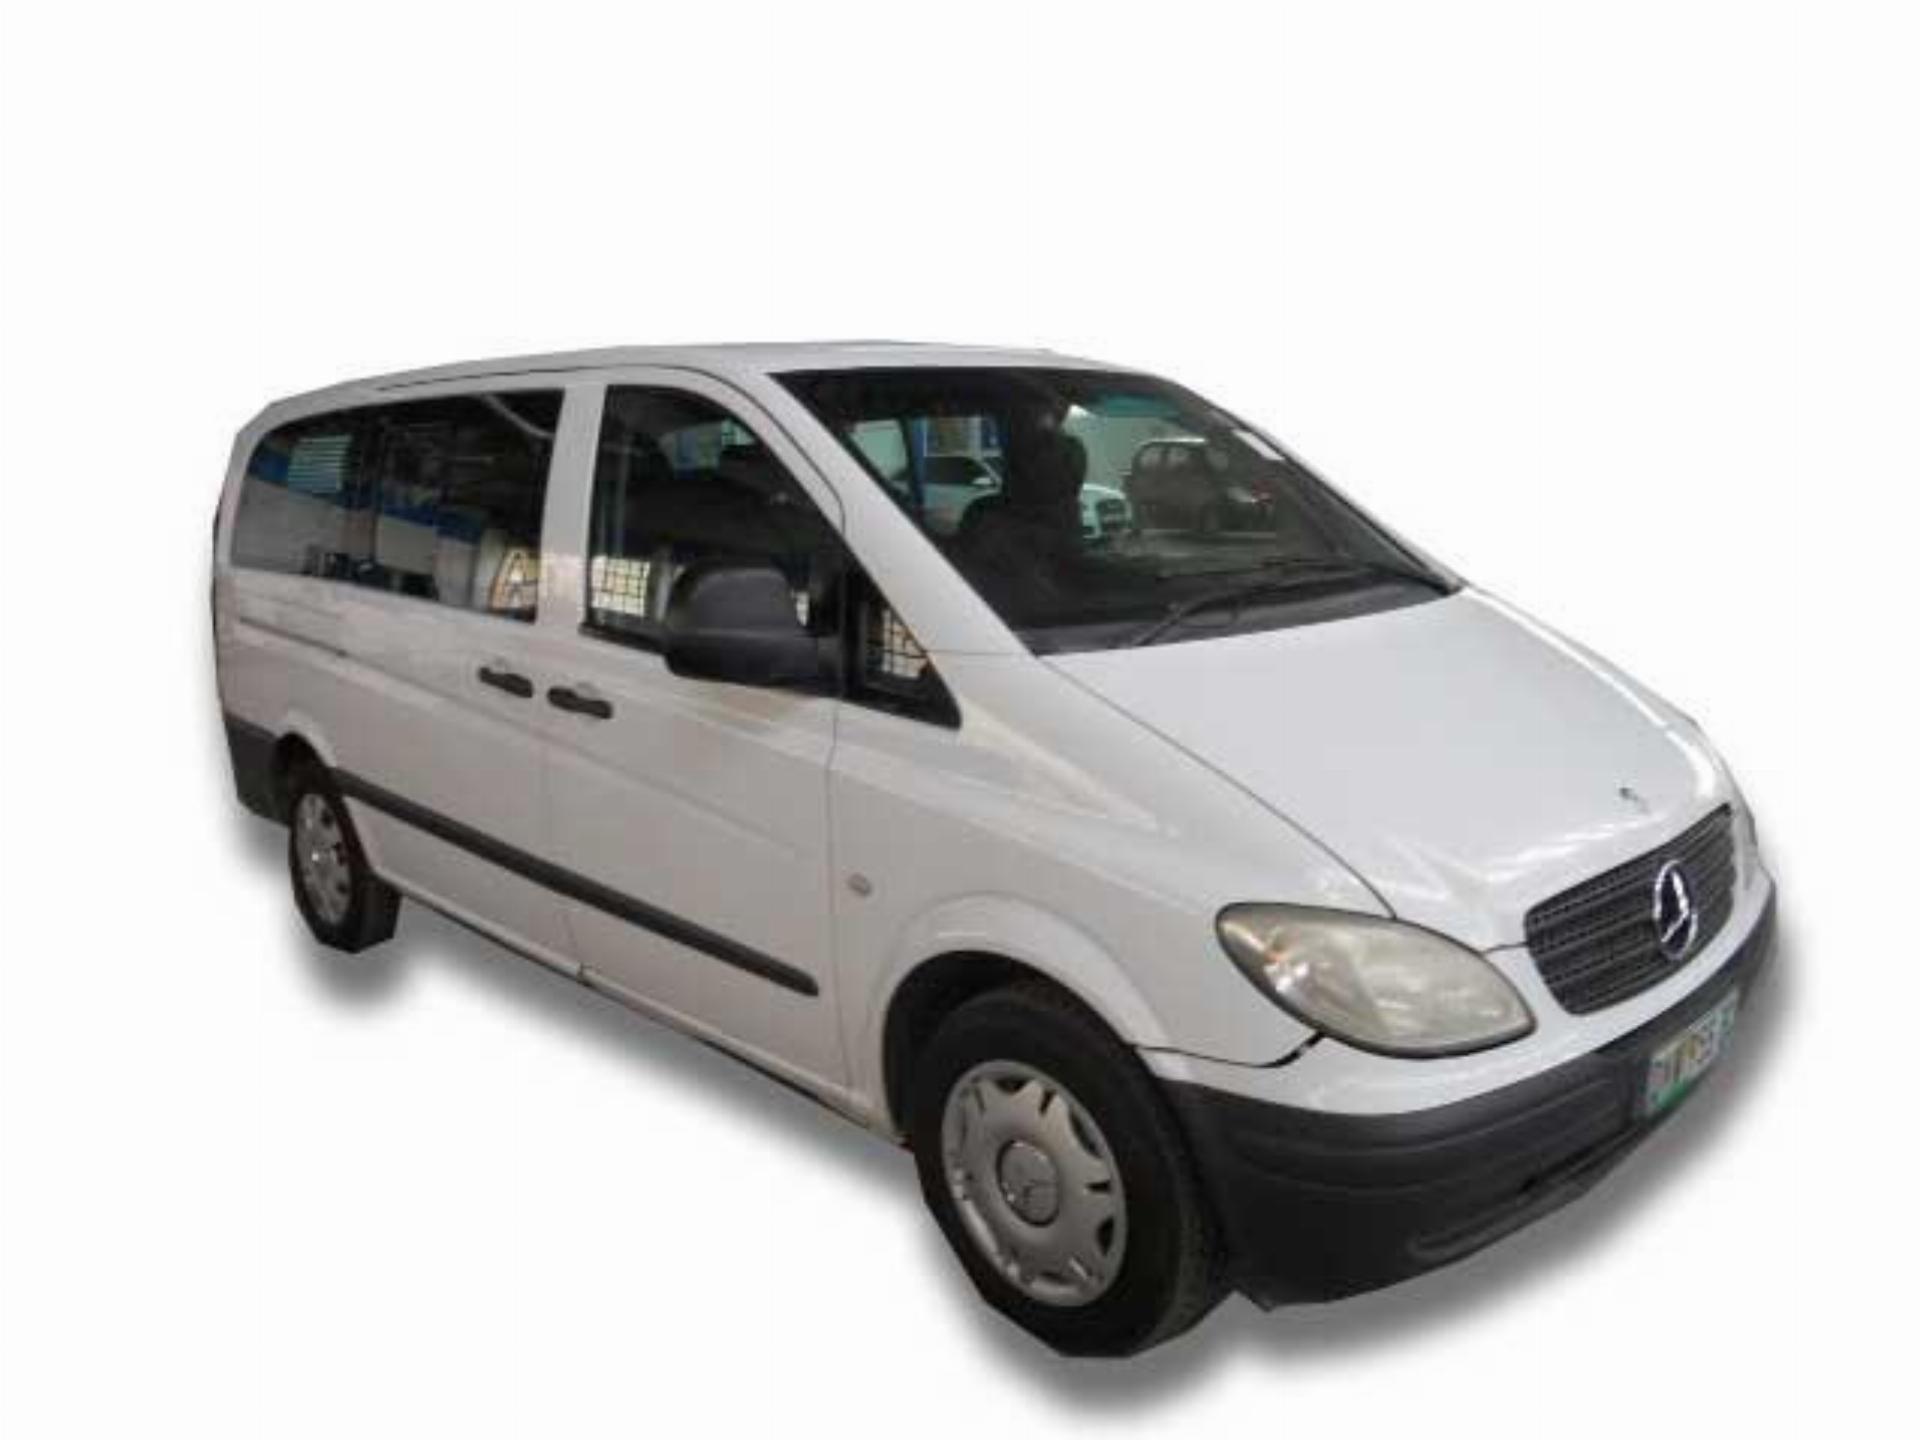 Repossessed Mercedes Benz Vito 115 2.2 Cdi 2006 on auction